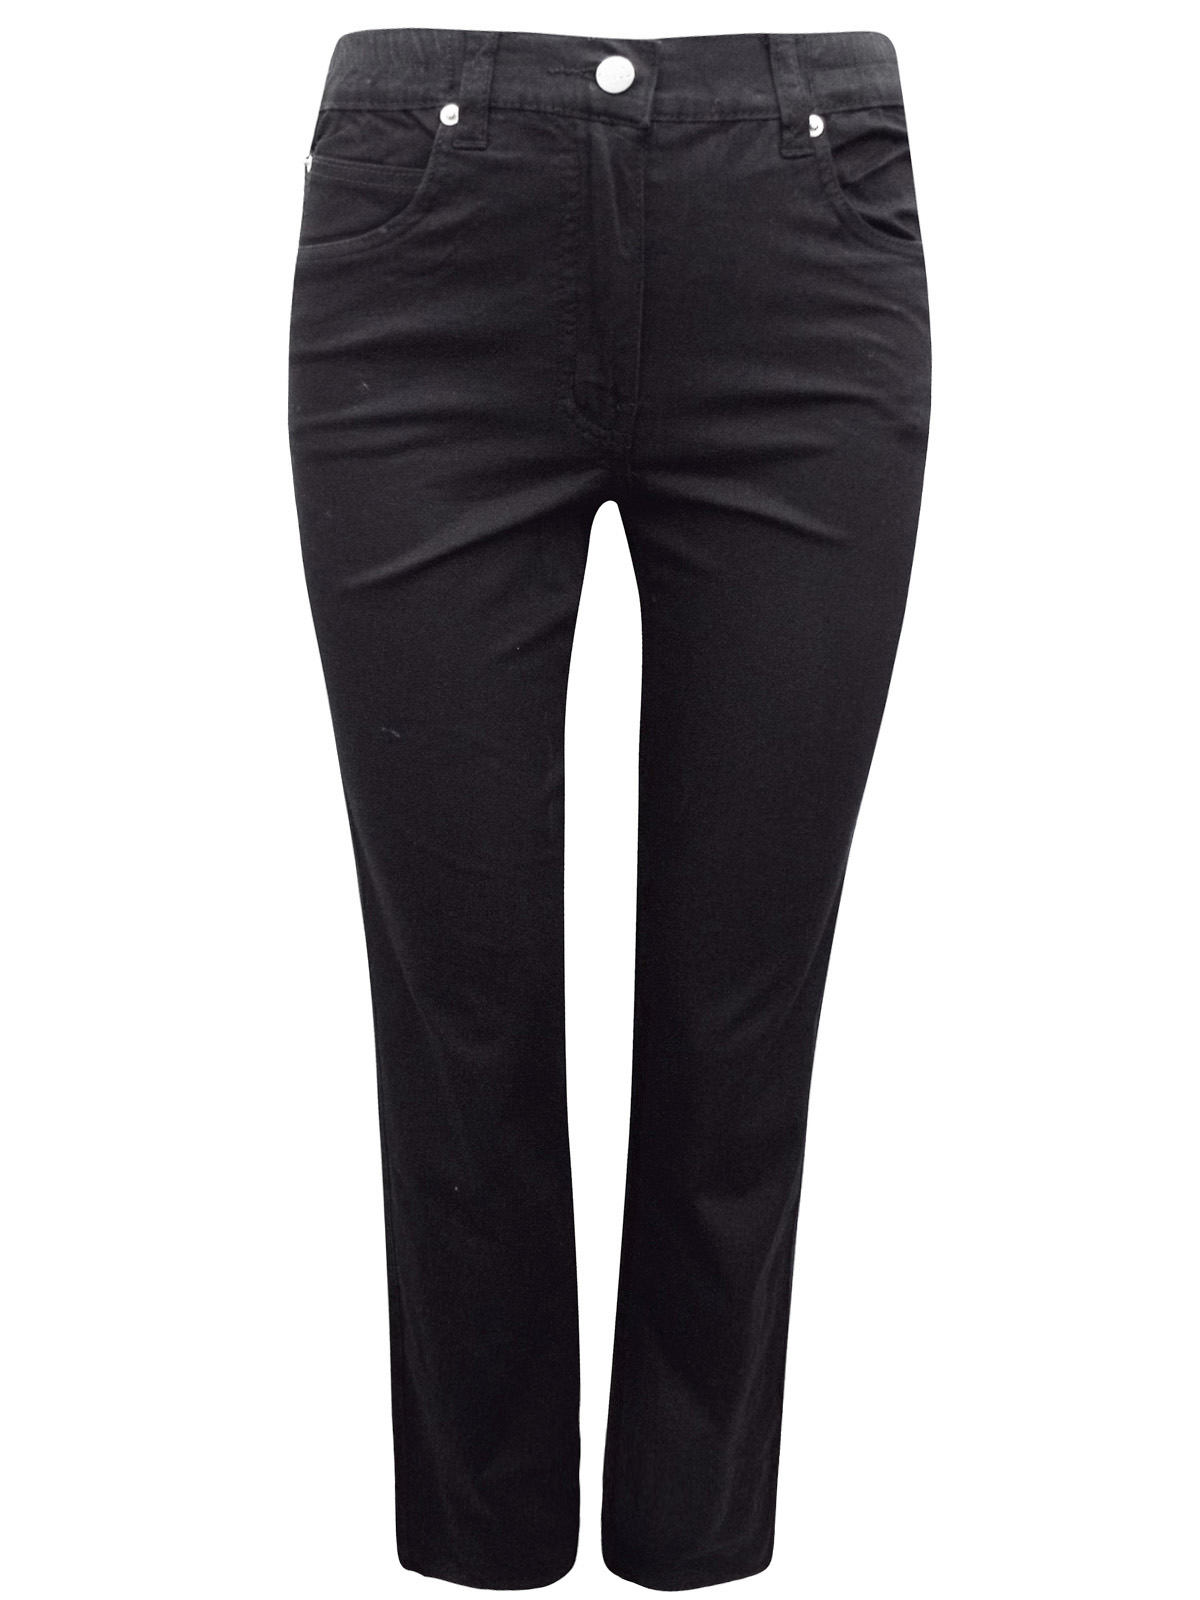 Gill - - Gill Jeans BLACK Cotton Rich 5-Pocket Straight Fit Denim Jeans ...